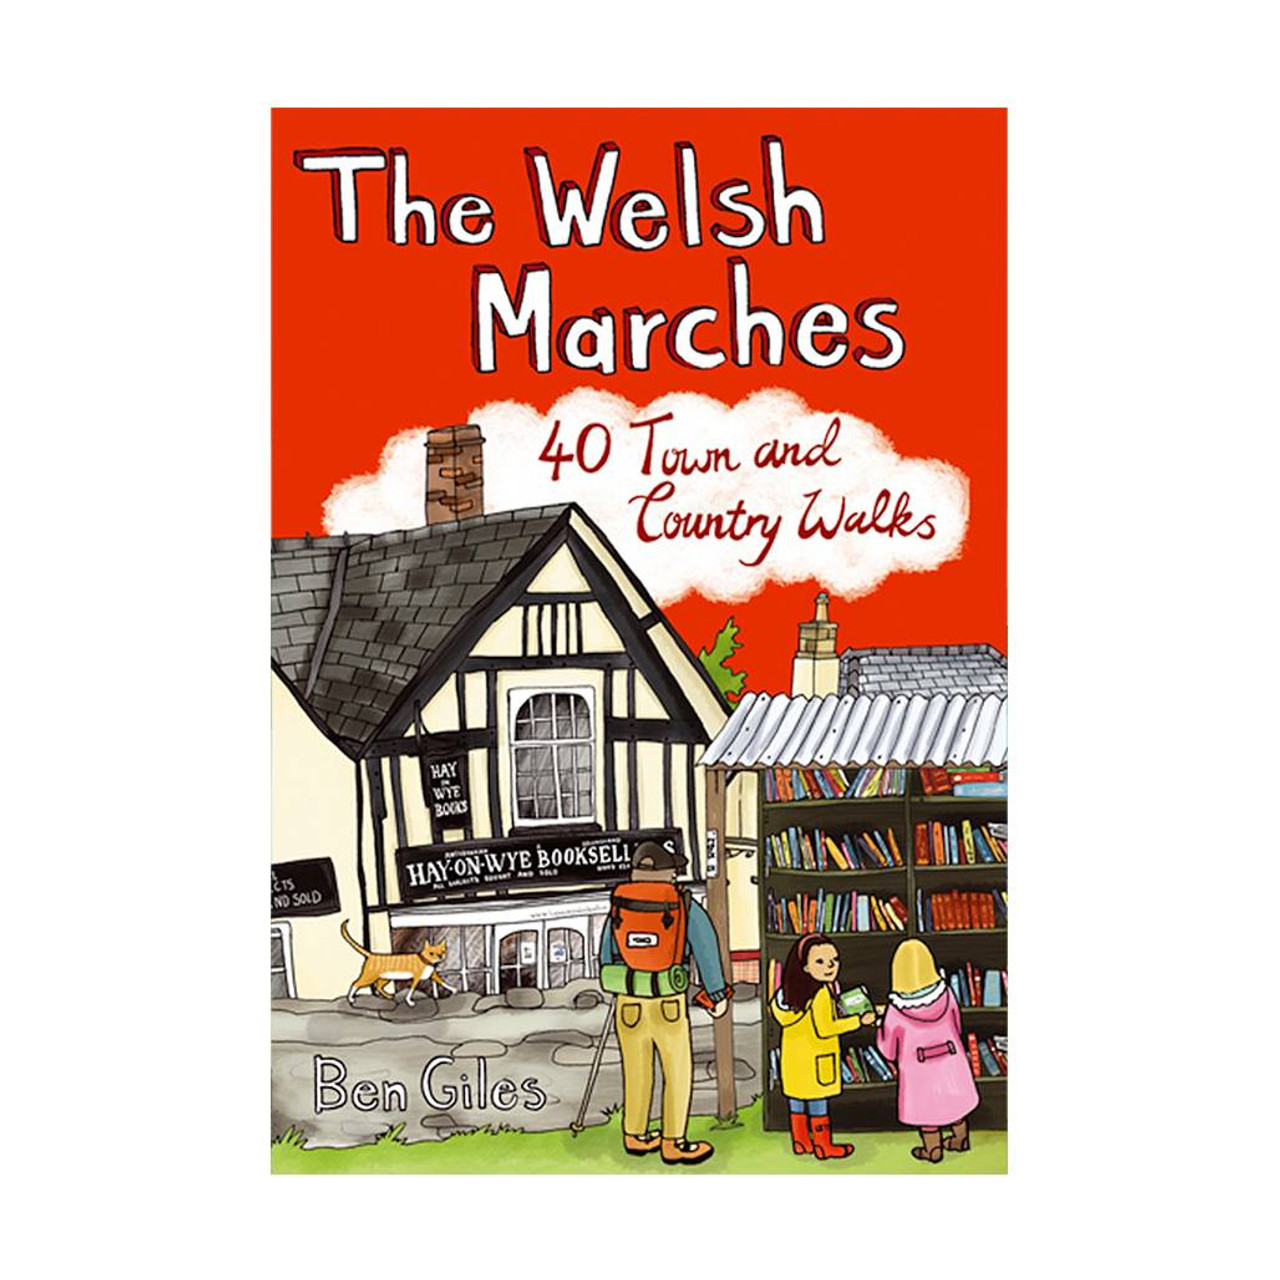 The Welsh Marches: 40 TownandCountry Walks